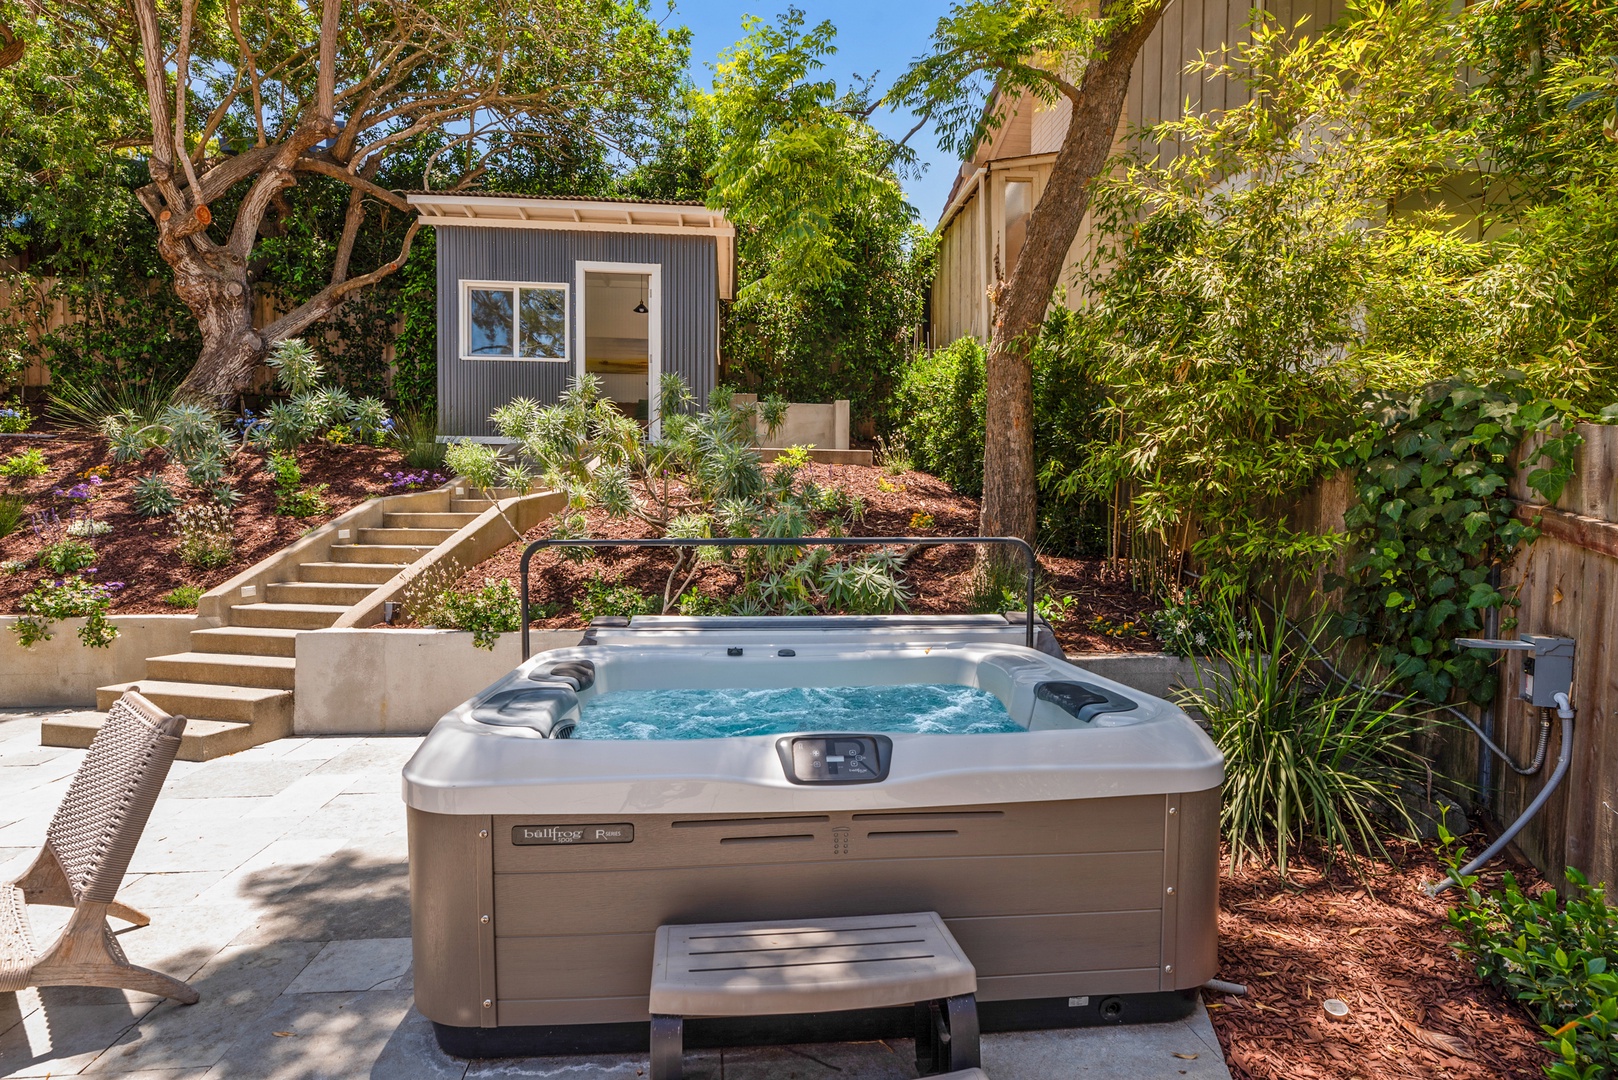 Del Mar Vacation Rentals, Del Mar Zuni Delight - Soak in the Hot Tub relaxing with the sound of birds singing